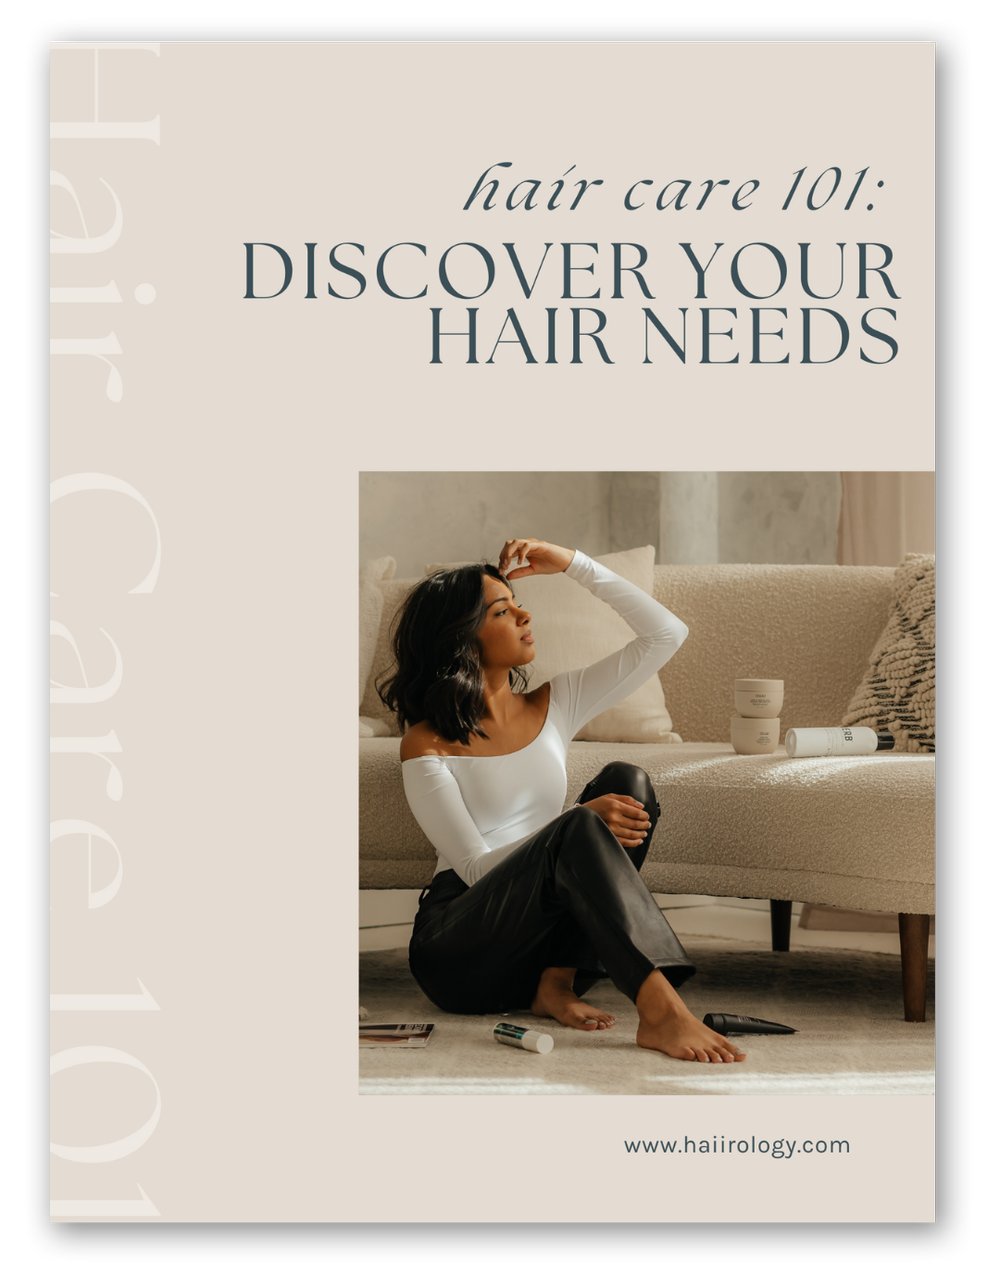 Hair Care 101: Discover Your Hair Needs